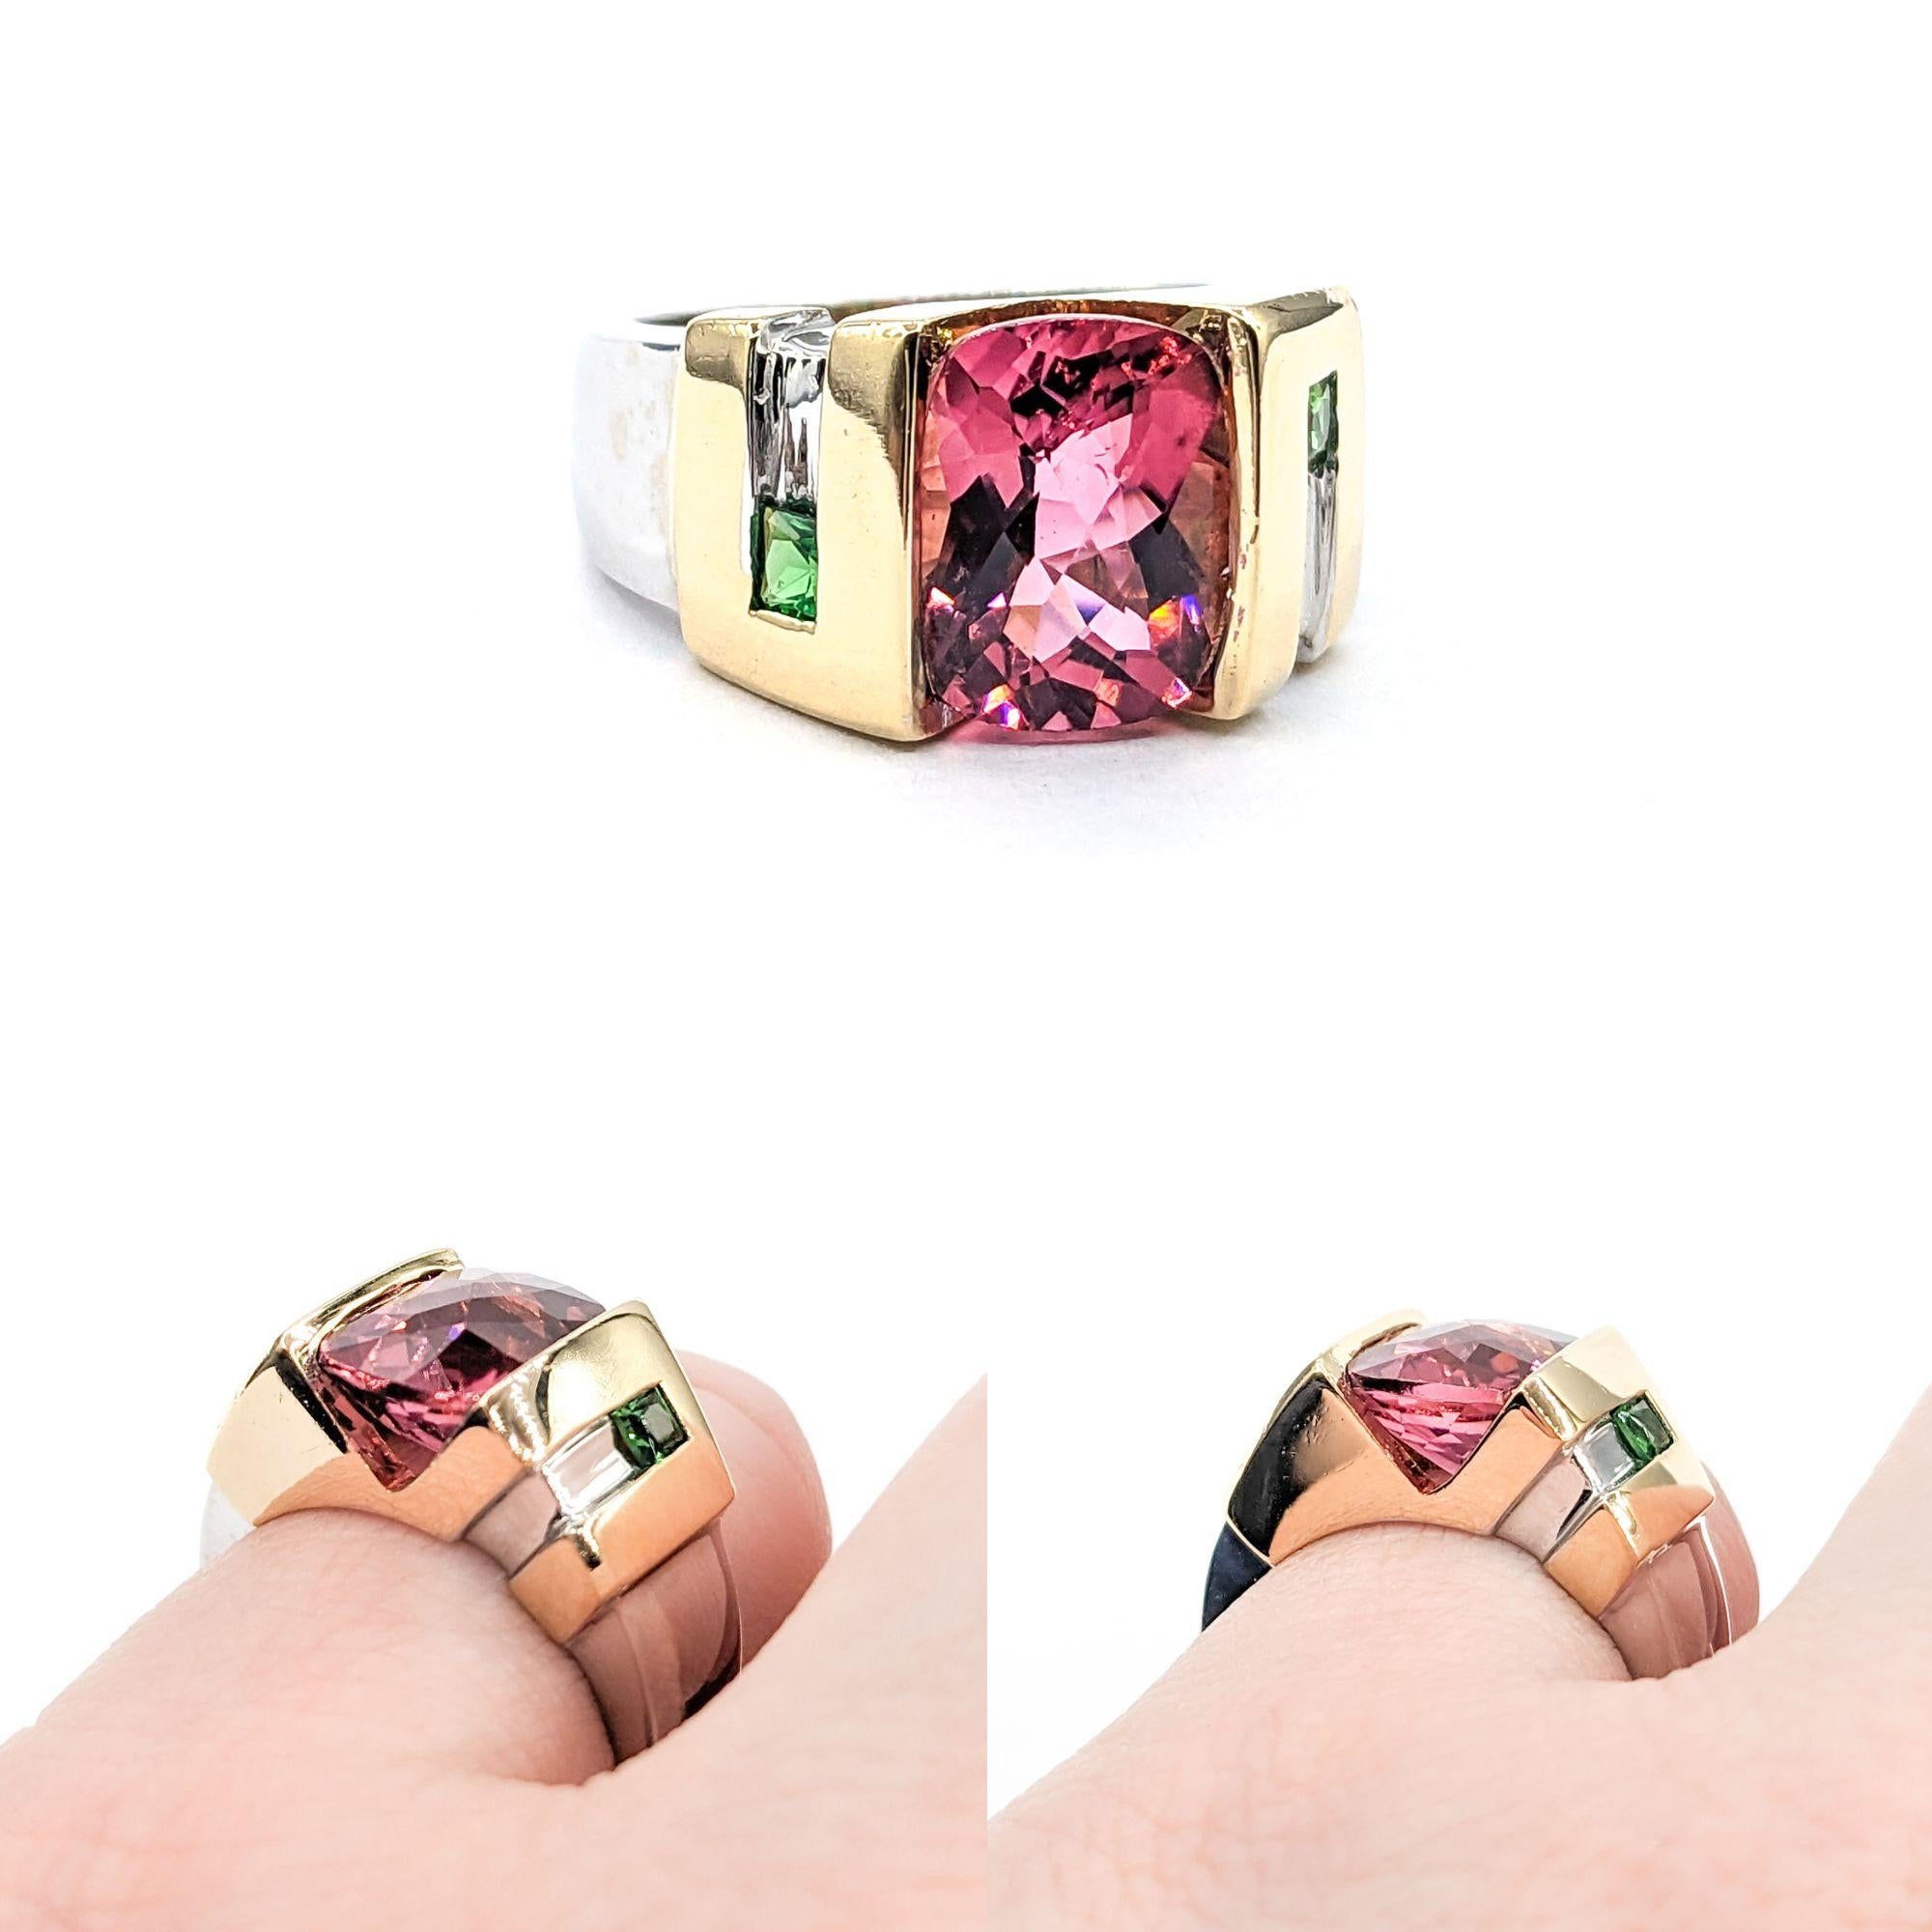 3.10ct cushion Pink Tourmaline & .18ctw Tsavorite Garnets Ring In Two-Tone Gold

Introducing a beautiful Gemstone Fashion Ring, exquisitely crafted in 14ktt Two-tone Gold. This distinctive piece features a dazzling3.10ct cushion Pink Tourmaline